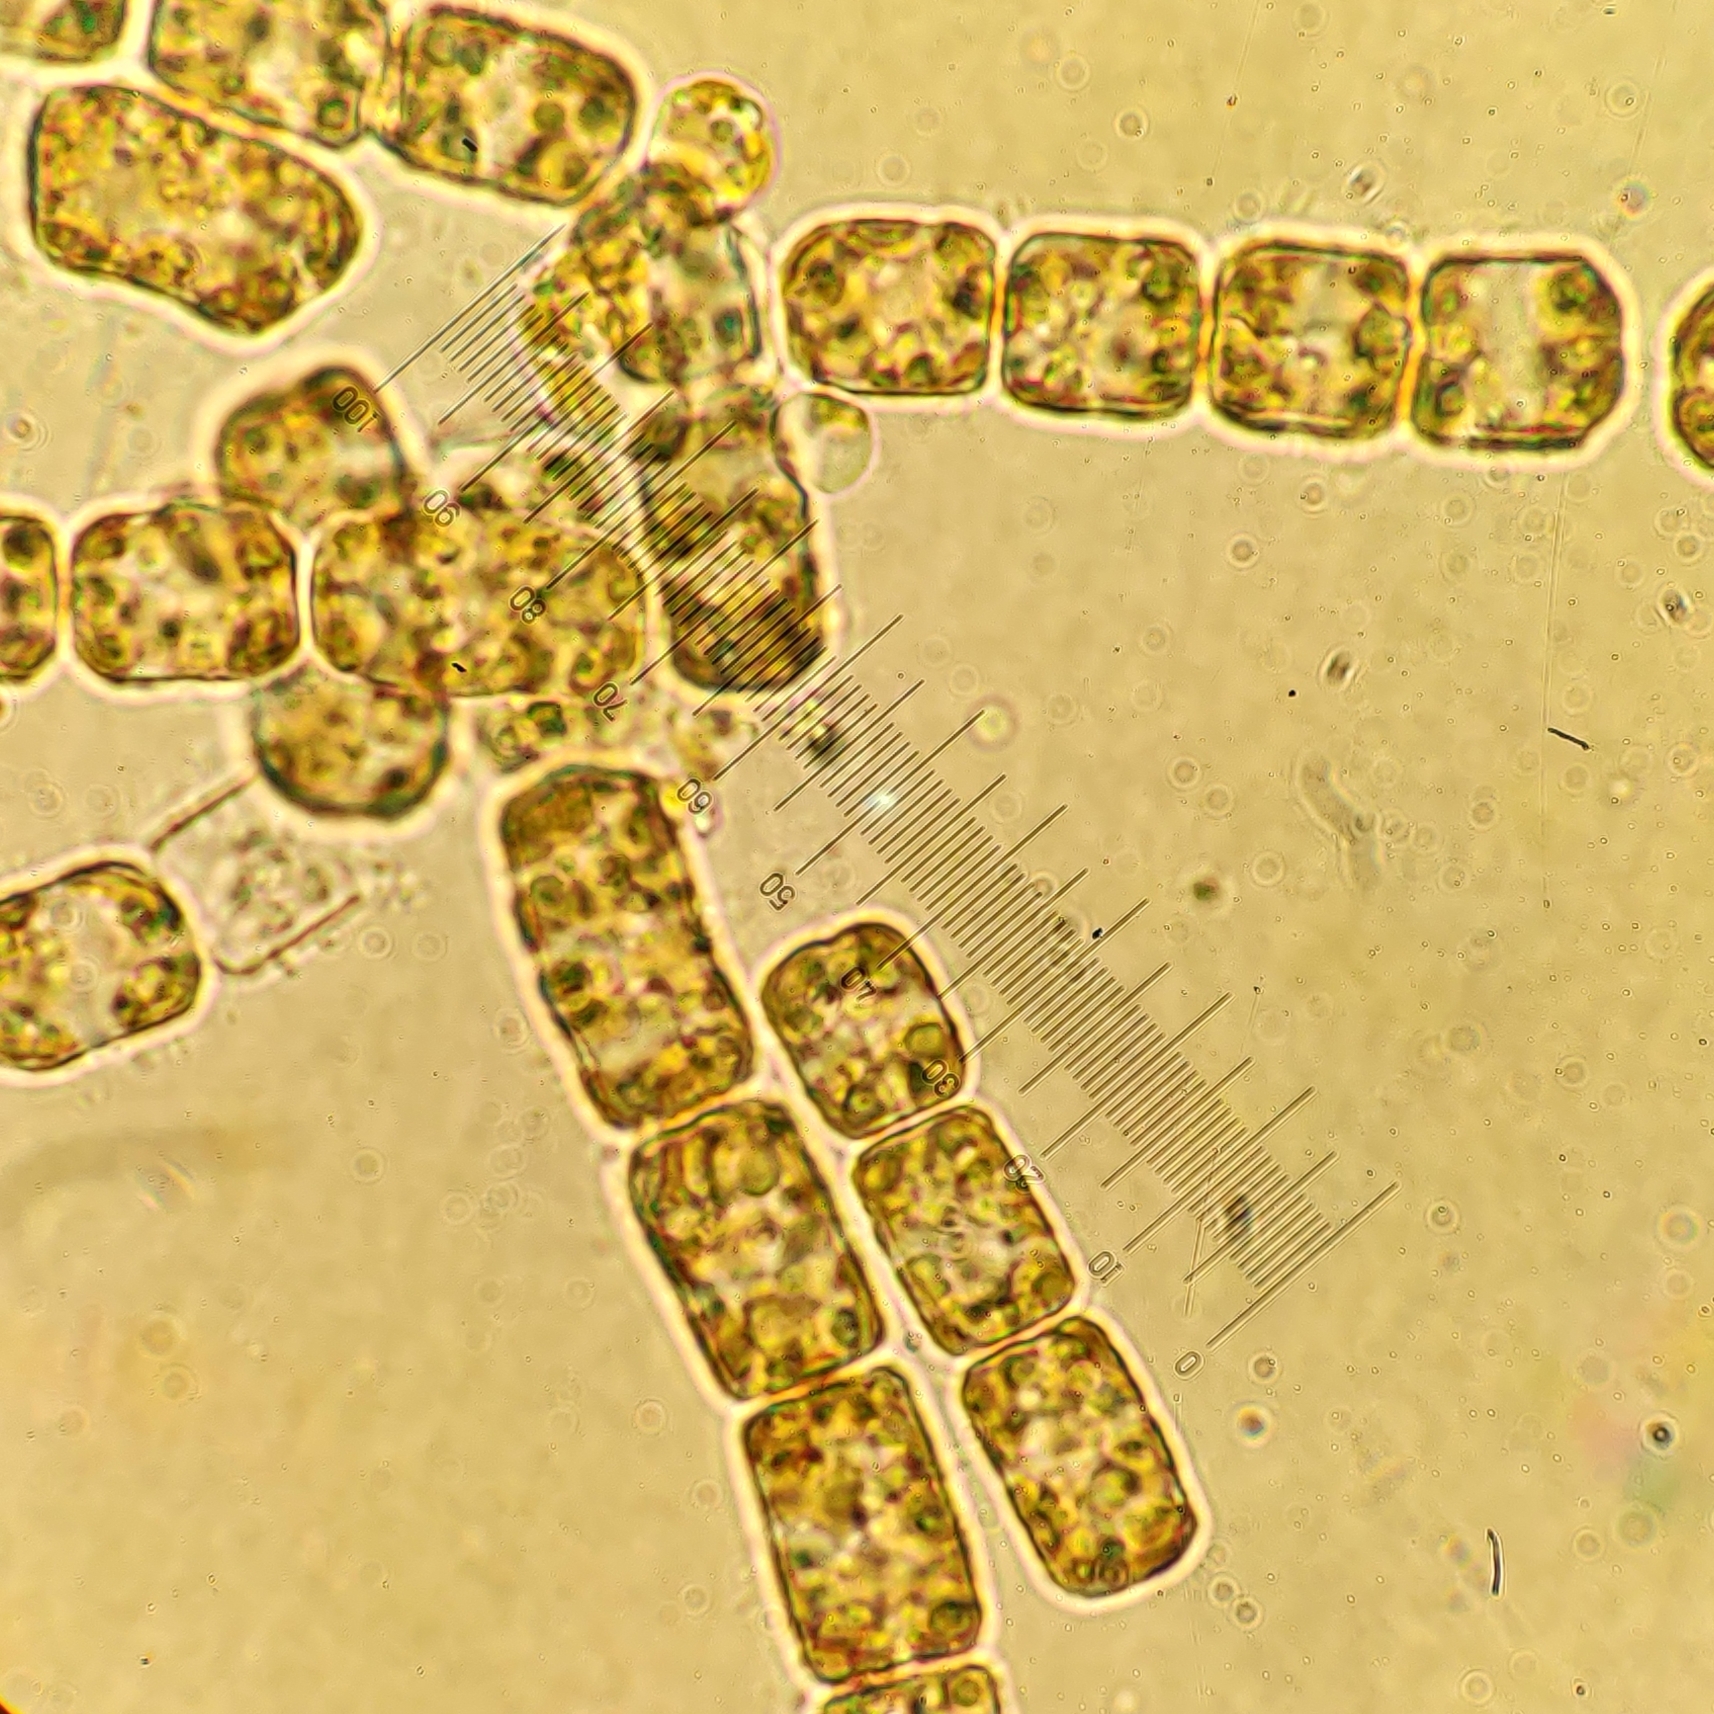 A diatom (Thalassiosira nordenskioeldi). Elena grows these in the lab for the BIOPOLE project